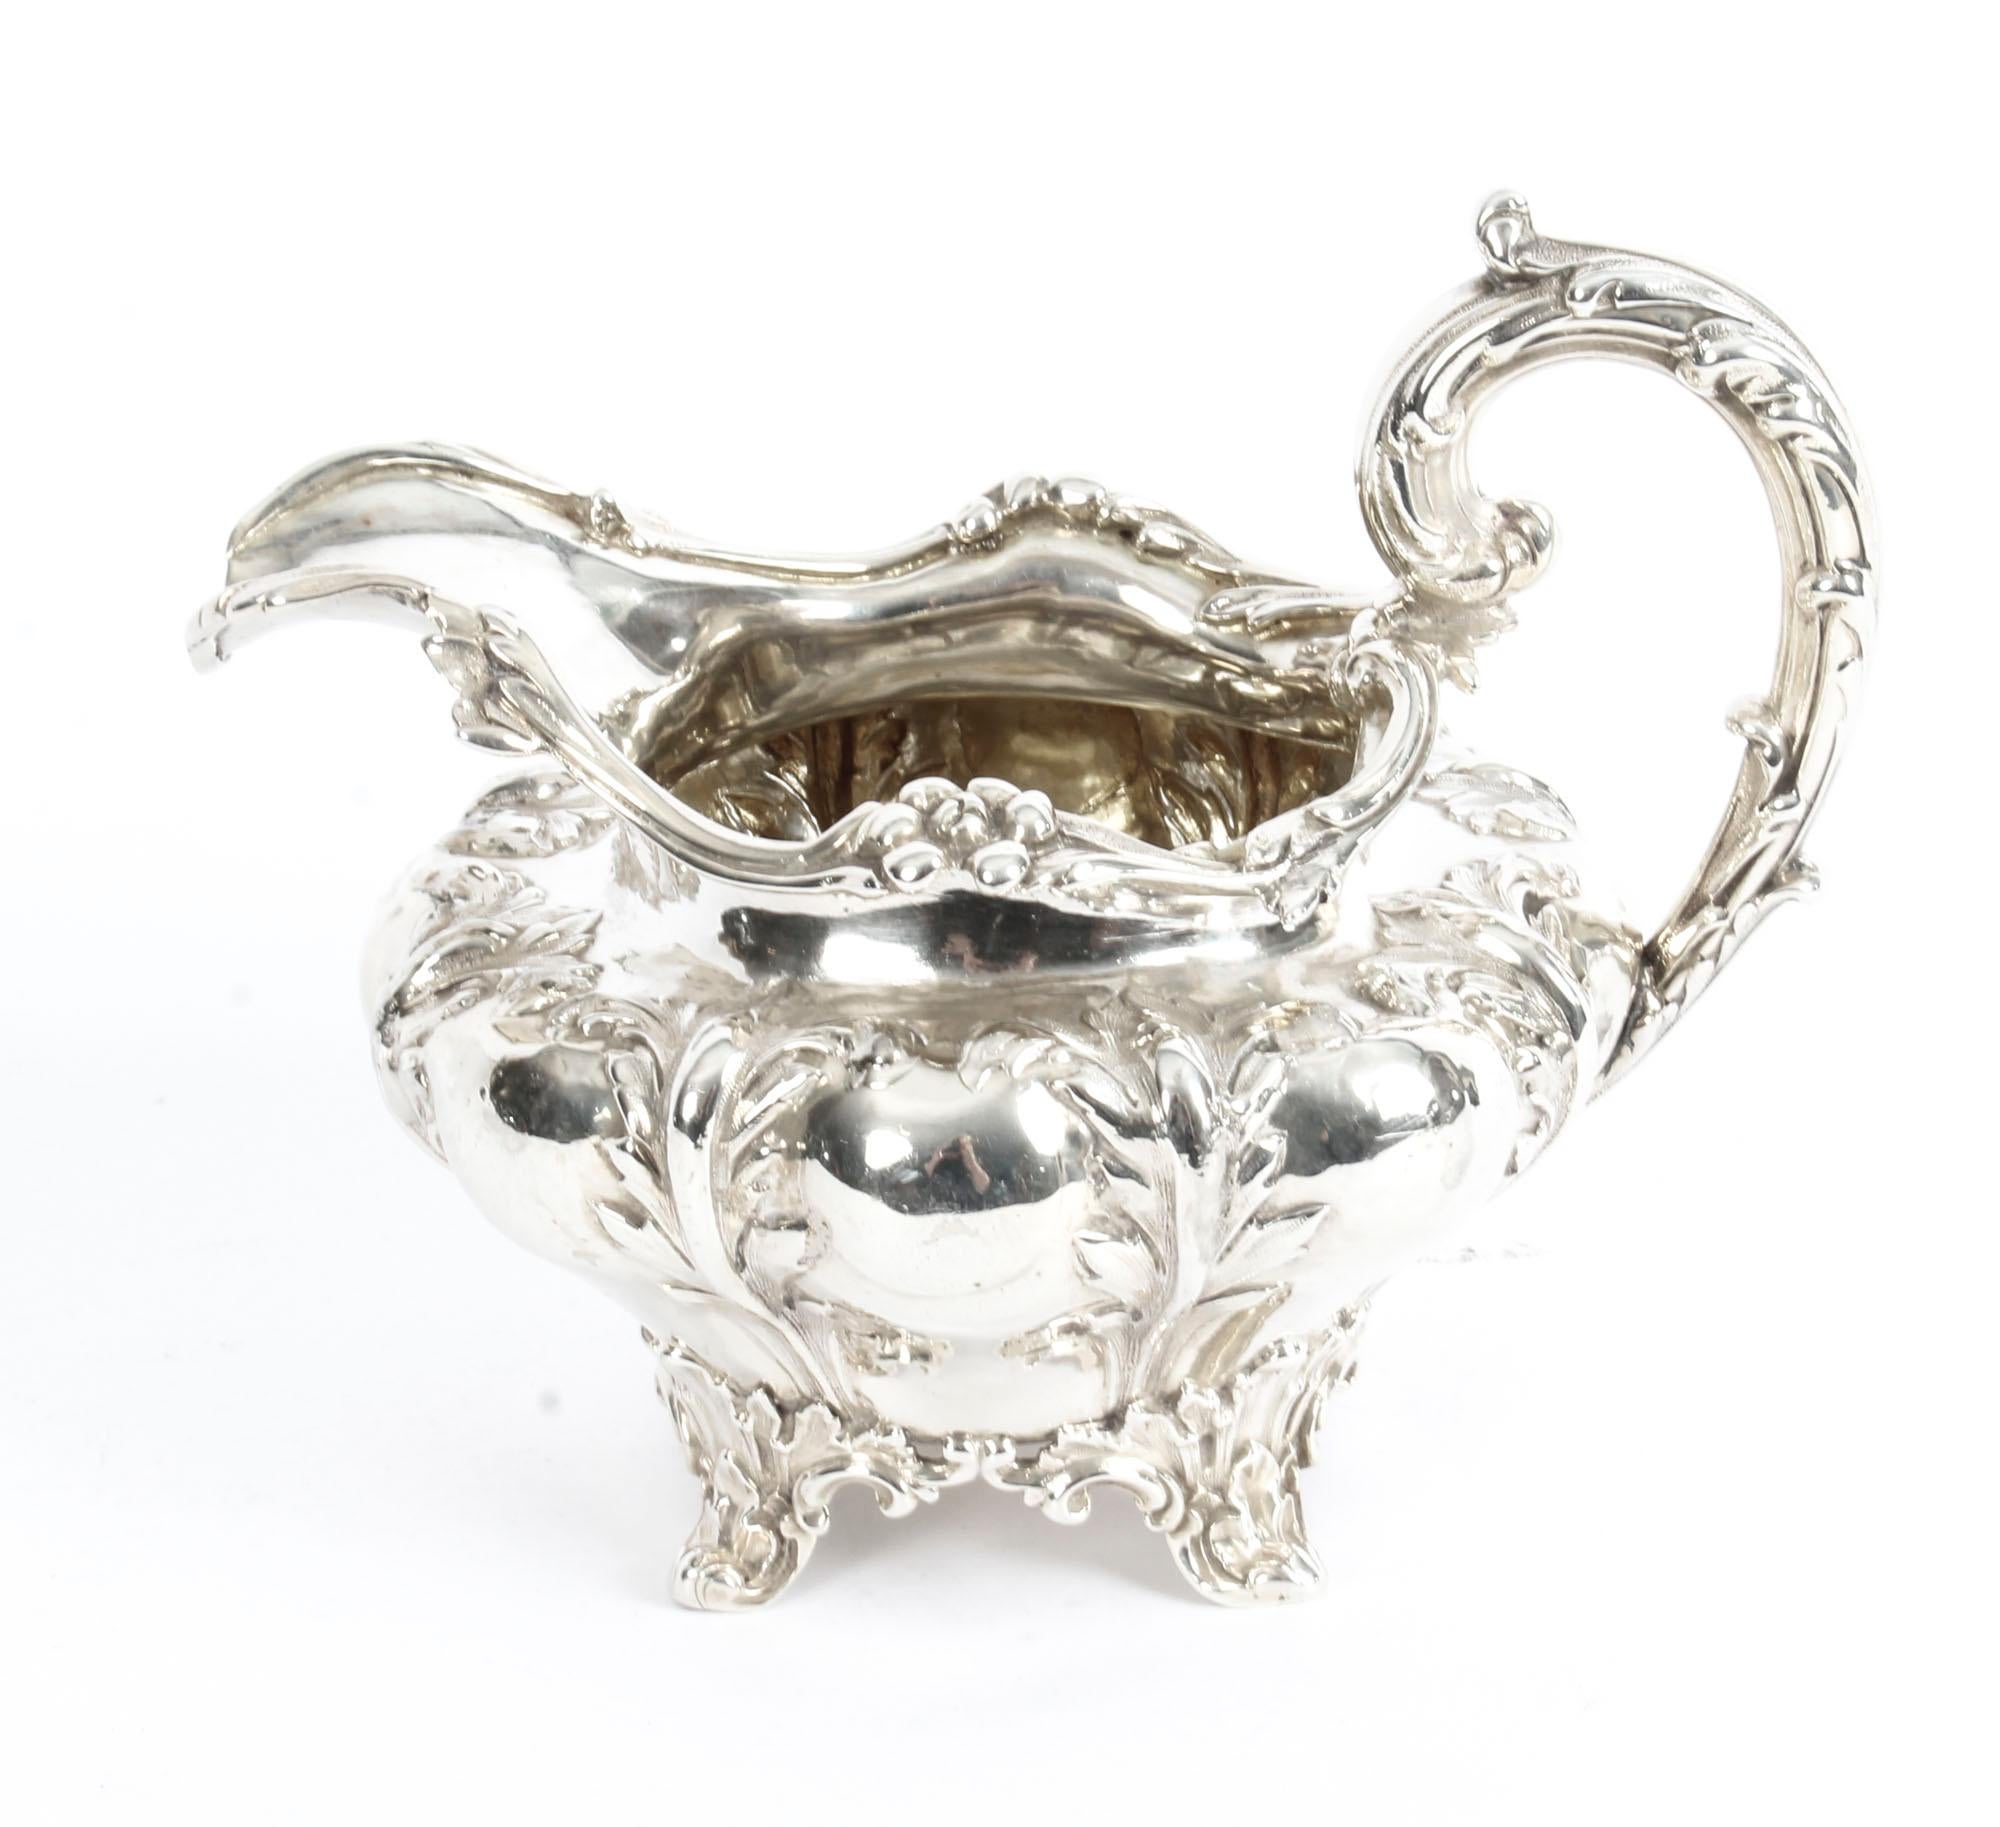 This is a rare and exquisite English William IV antique sterling silver three-piece tea set with full hallmarks for London 1833 and the makers' mark of the highly sought after silversmiths Edward, Edward junior, John & William Barnard.

This